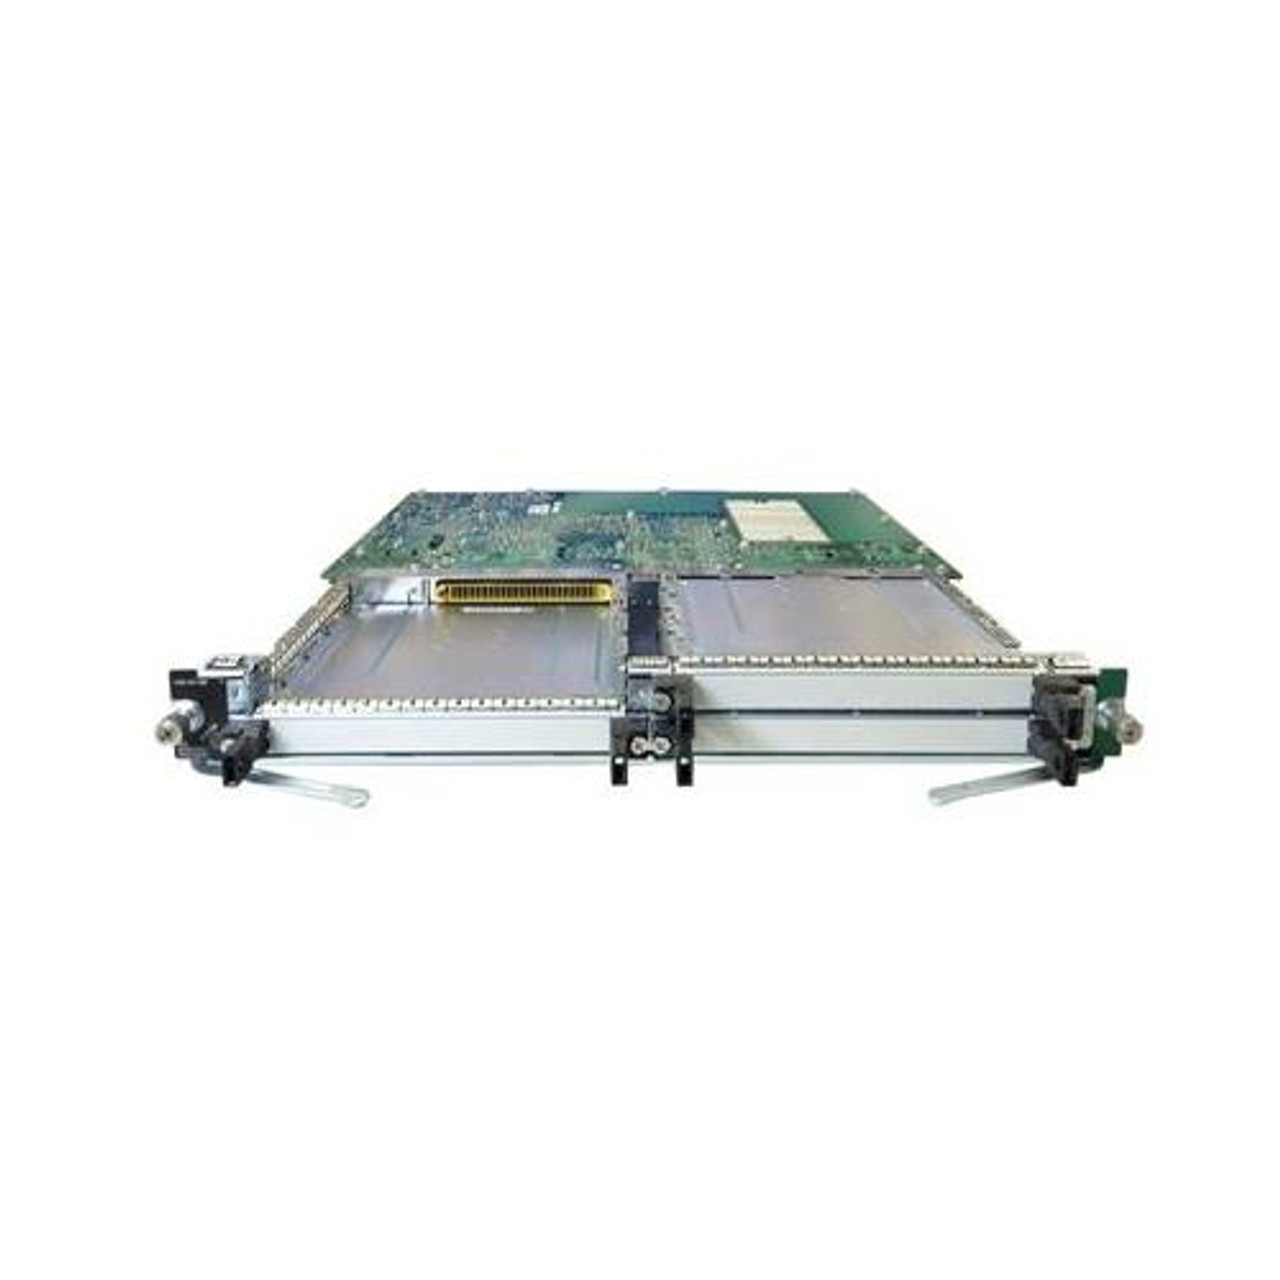 NPE-2G Cisco 3x 10/100/1000Base-T and 3x SFP (mini-GBIC) with 1x CompactFlash Card Slot Processing Engine (Refurbished)